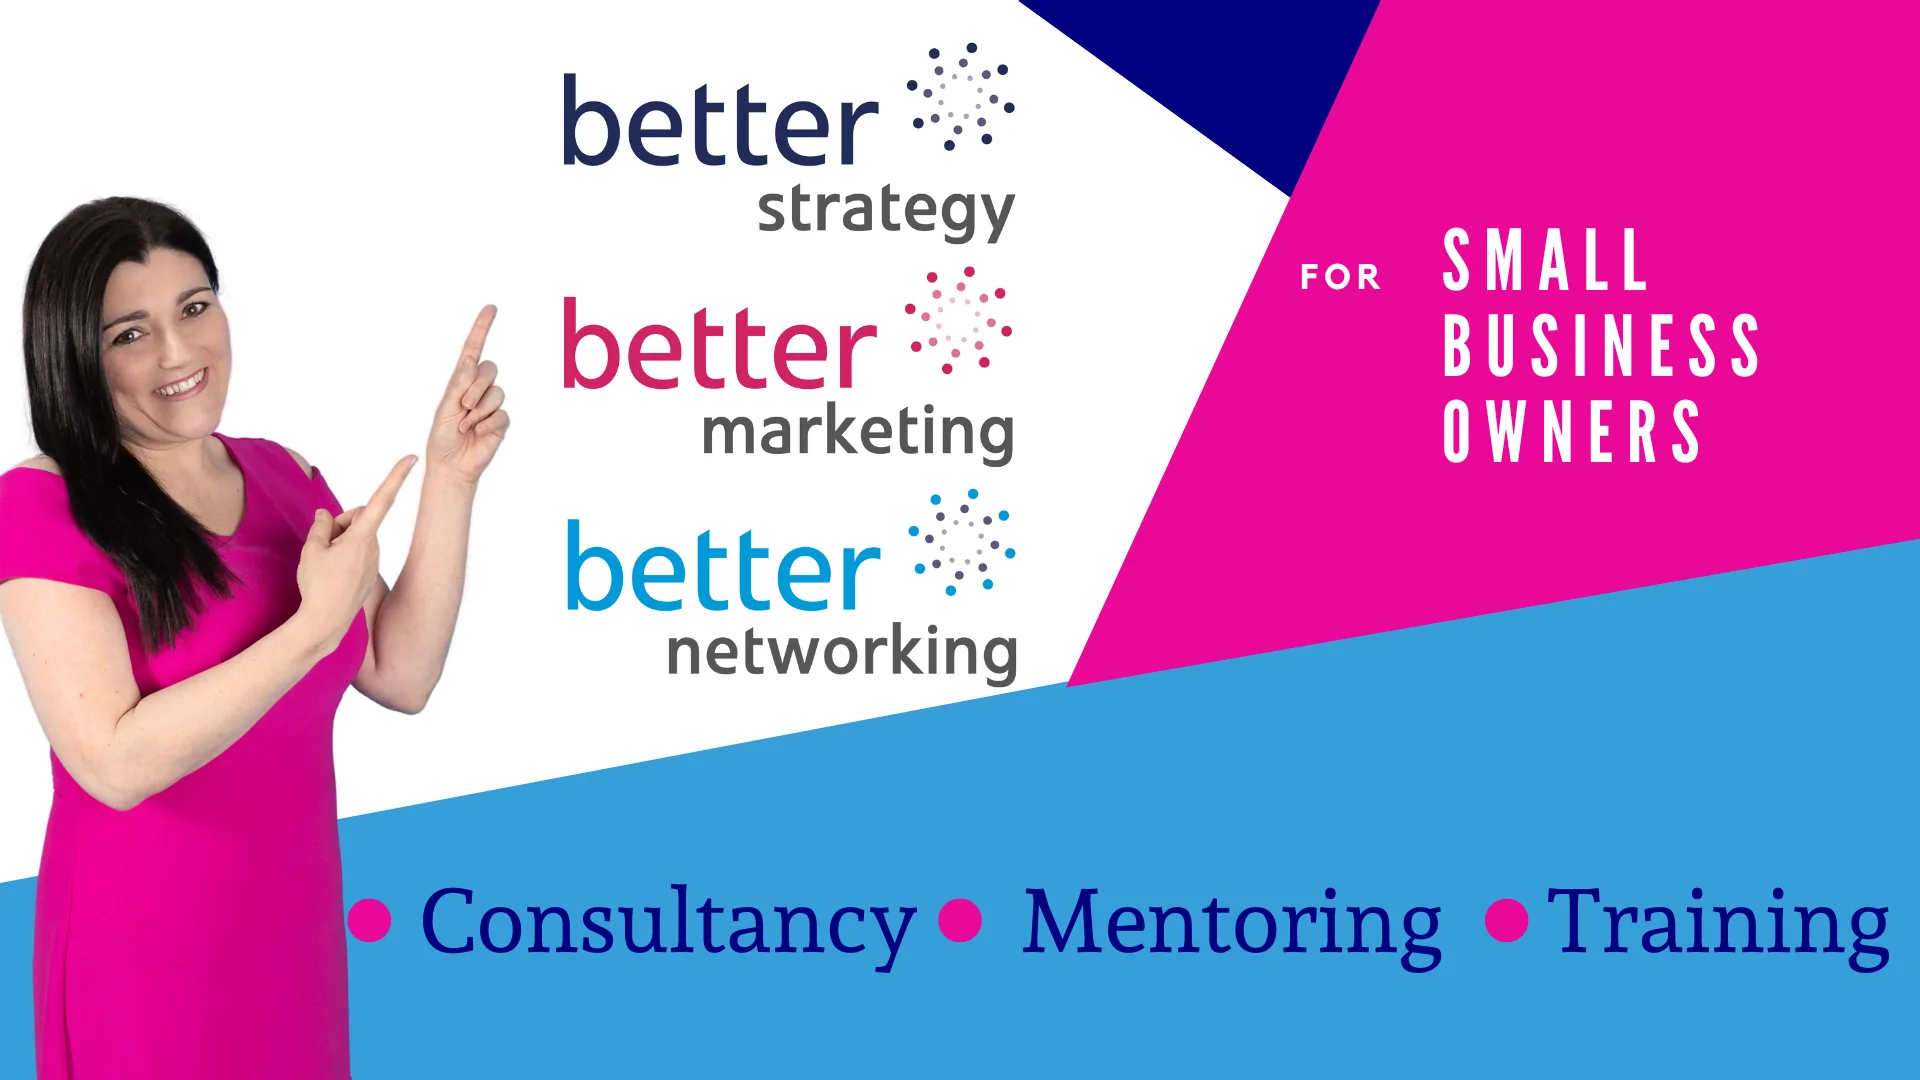 Home page cover image showing an image of Tracy Heatley with her consutlancy, mentoring, and training for small business owners wording